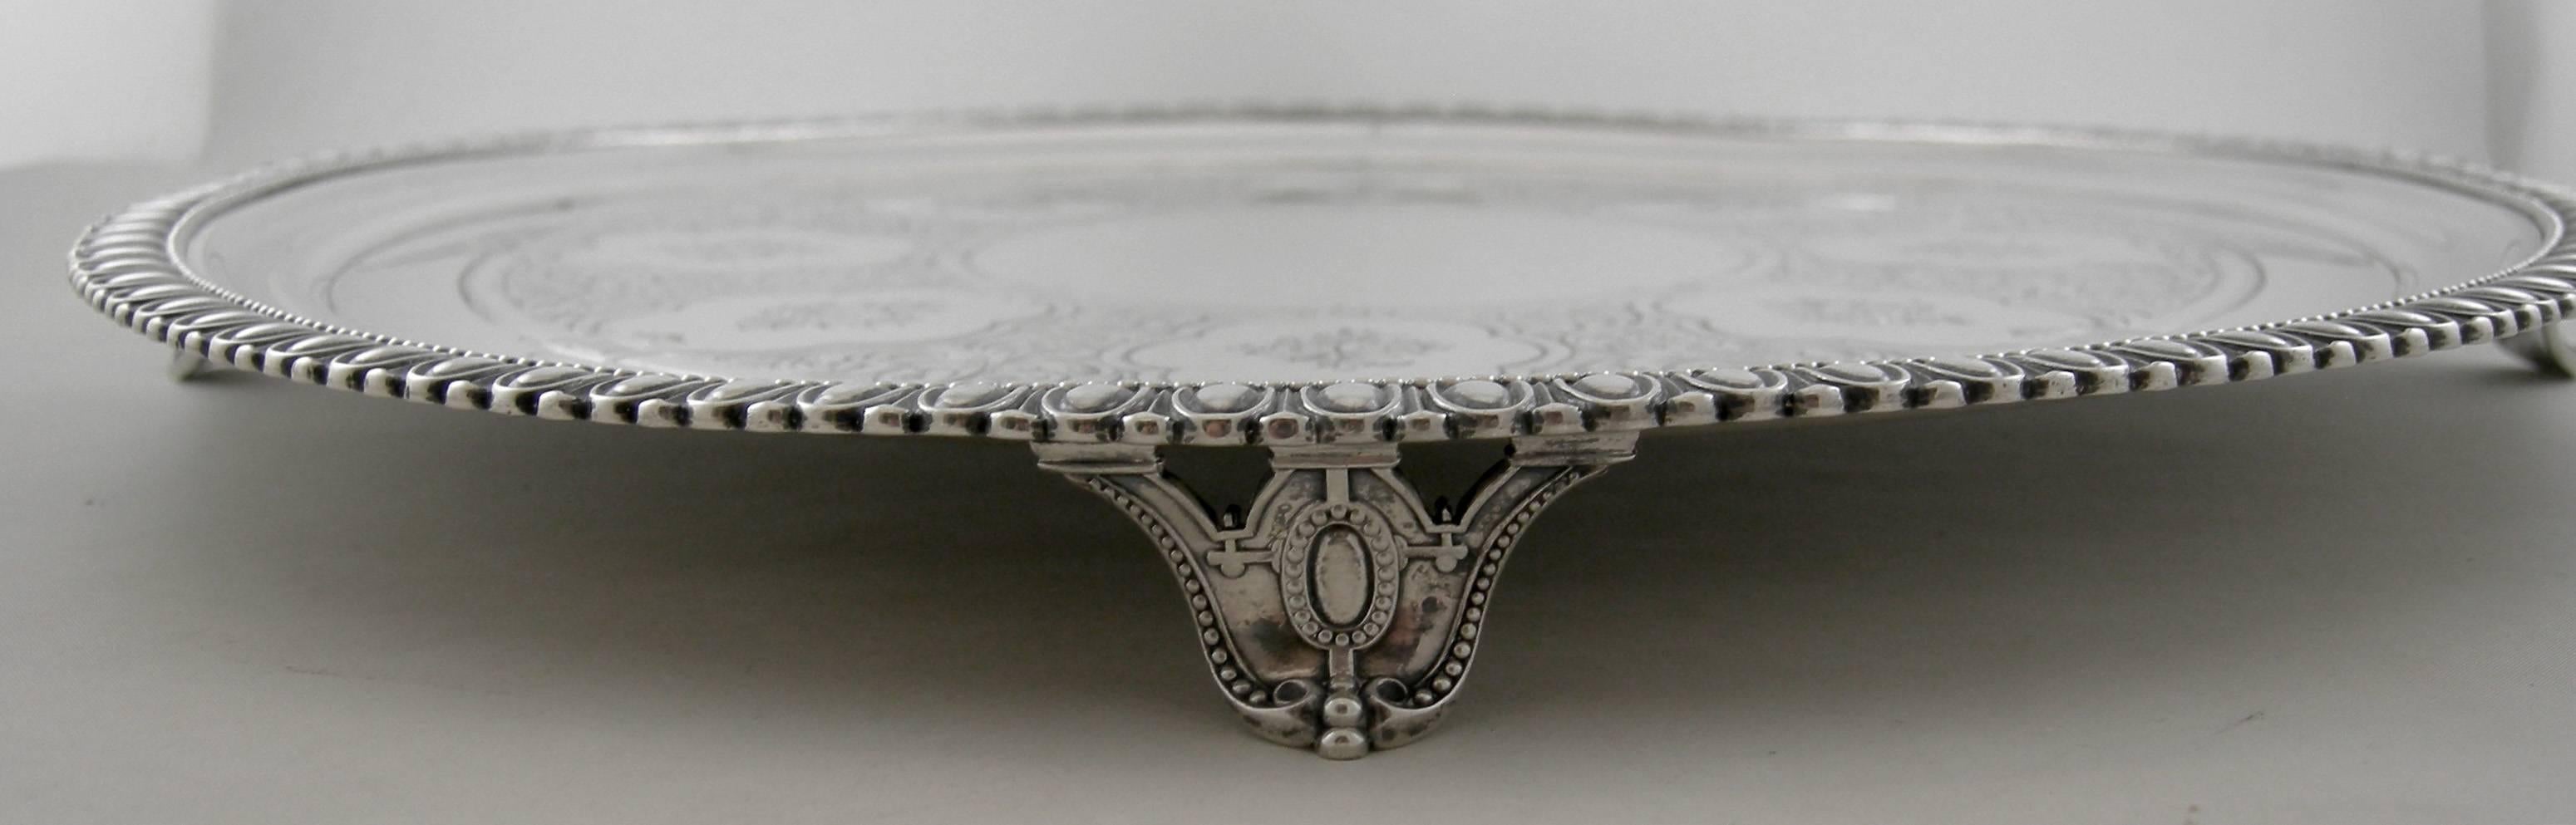 Sterling Tiffany & Co. 550 Broadway Footed Tray, circa 1855-1860 In Excellent Condition For Sale In Bridport, CT